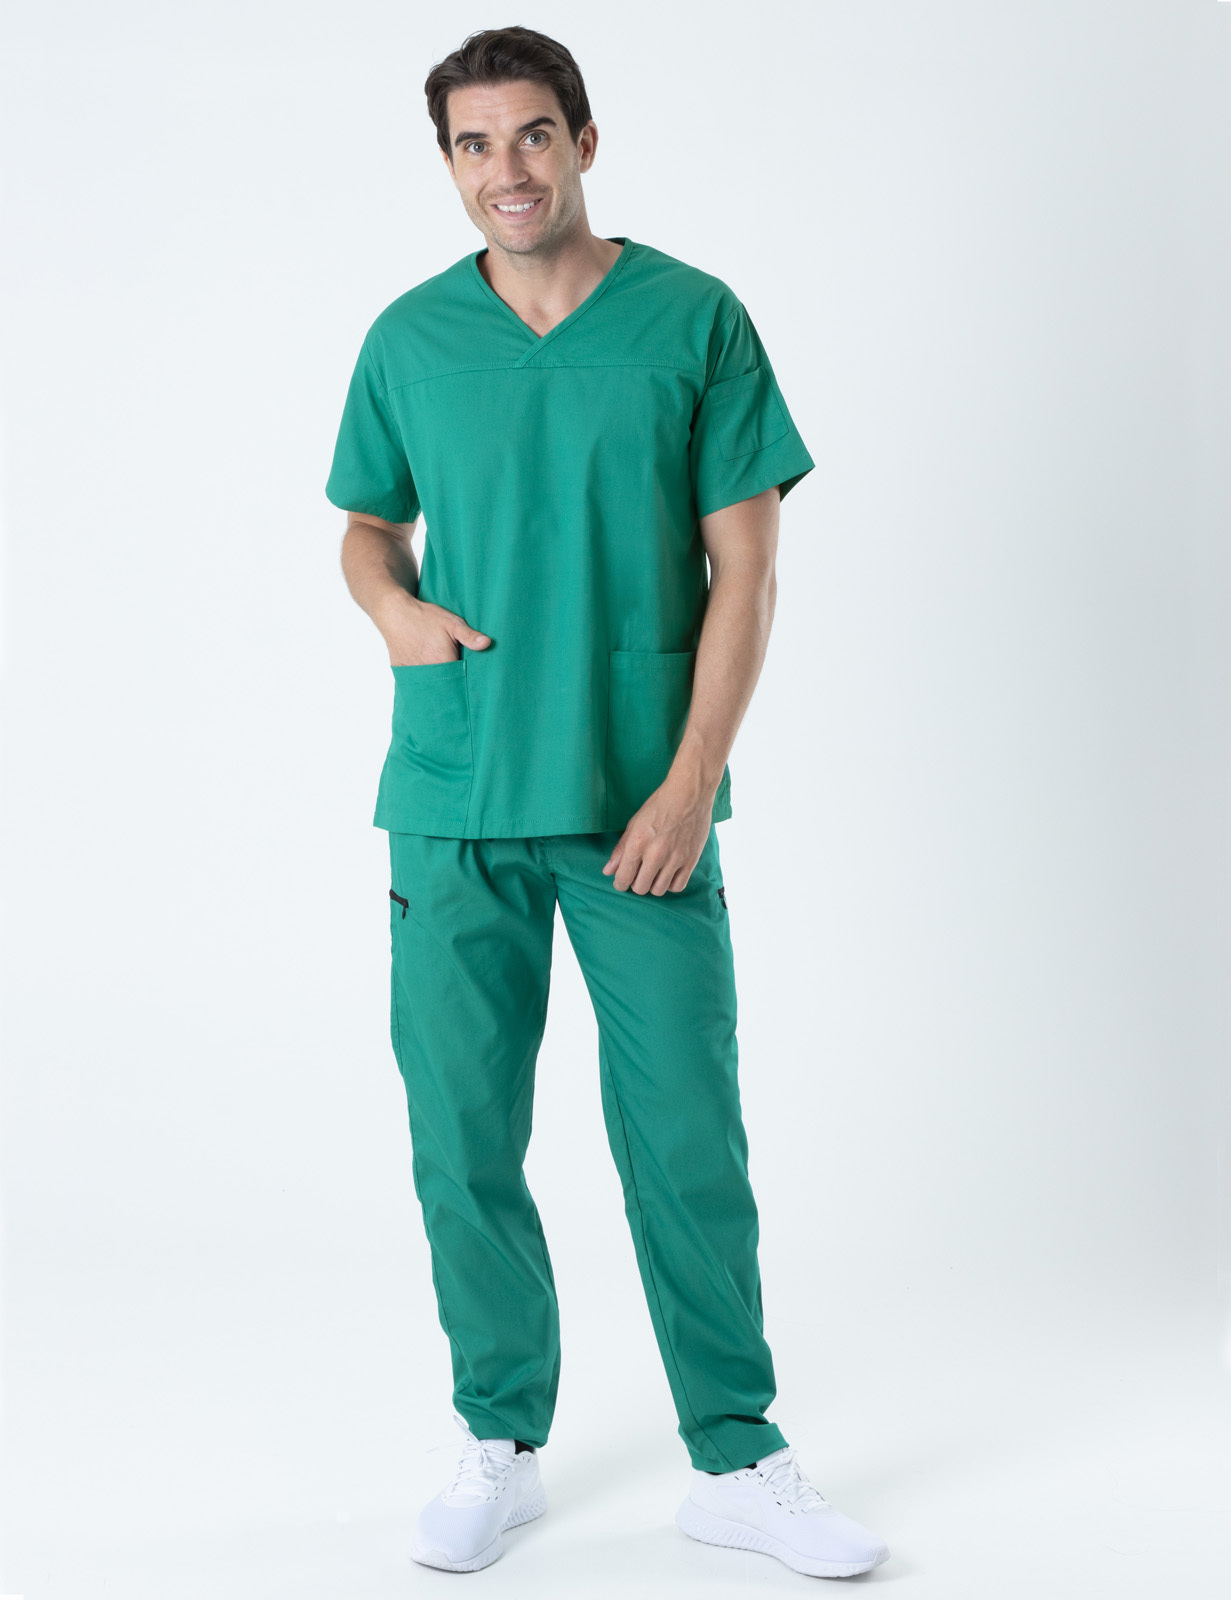 Men's Fit Solid Scrub Top - Hunter - 4X large - 0